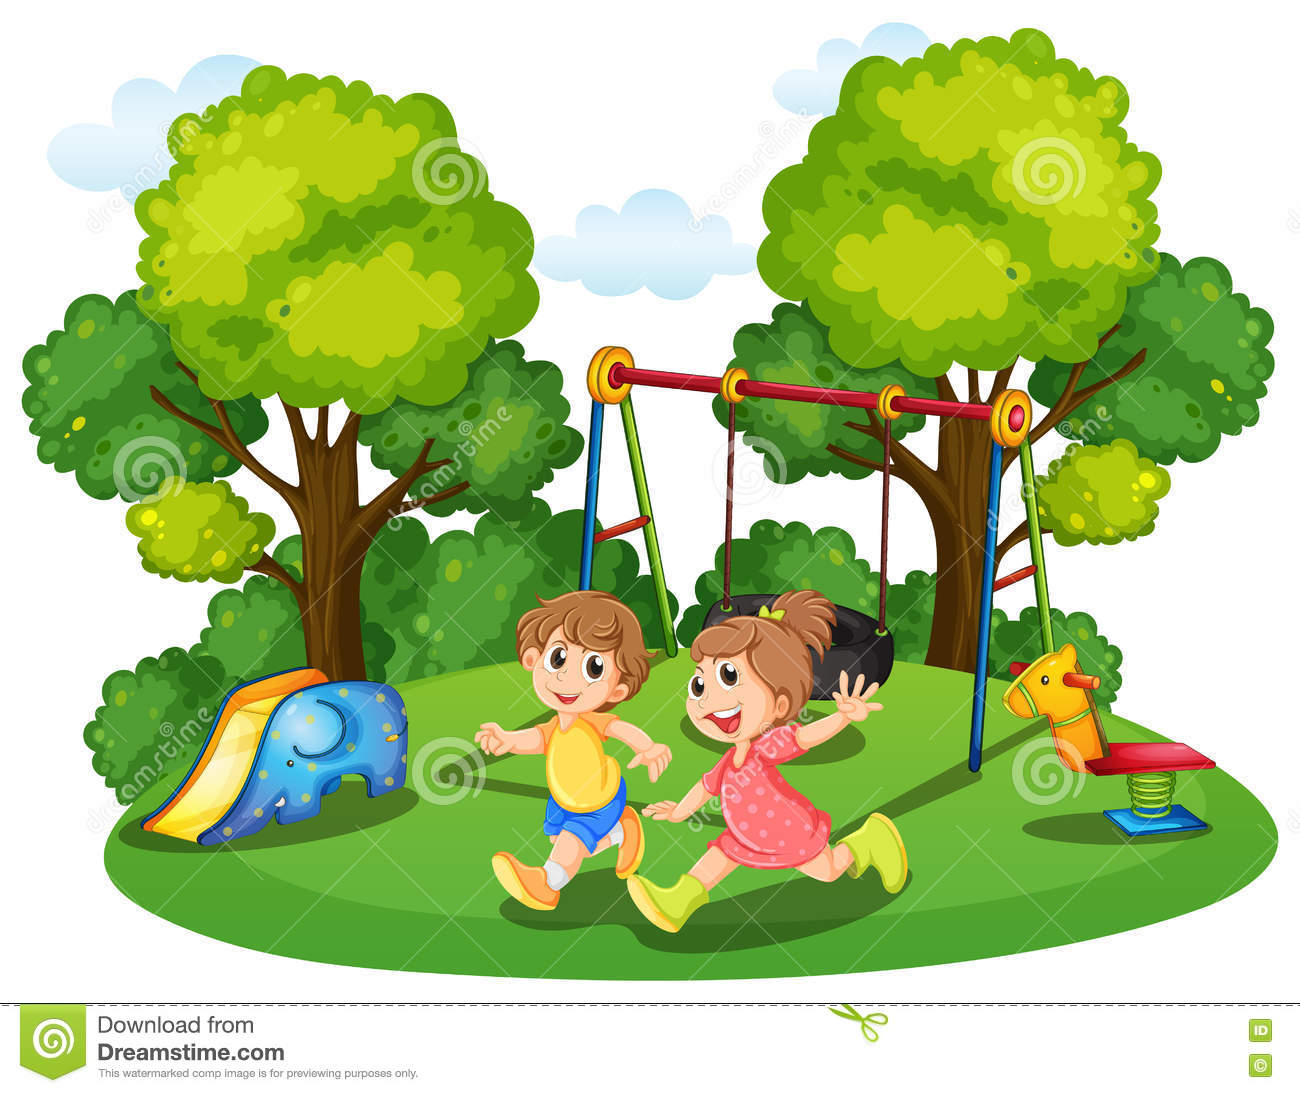 Children playing in the park 